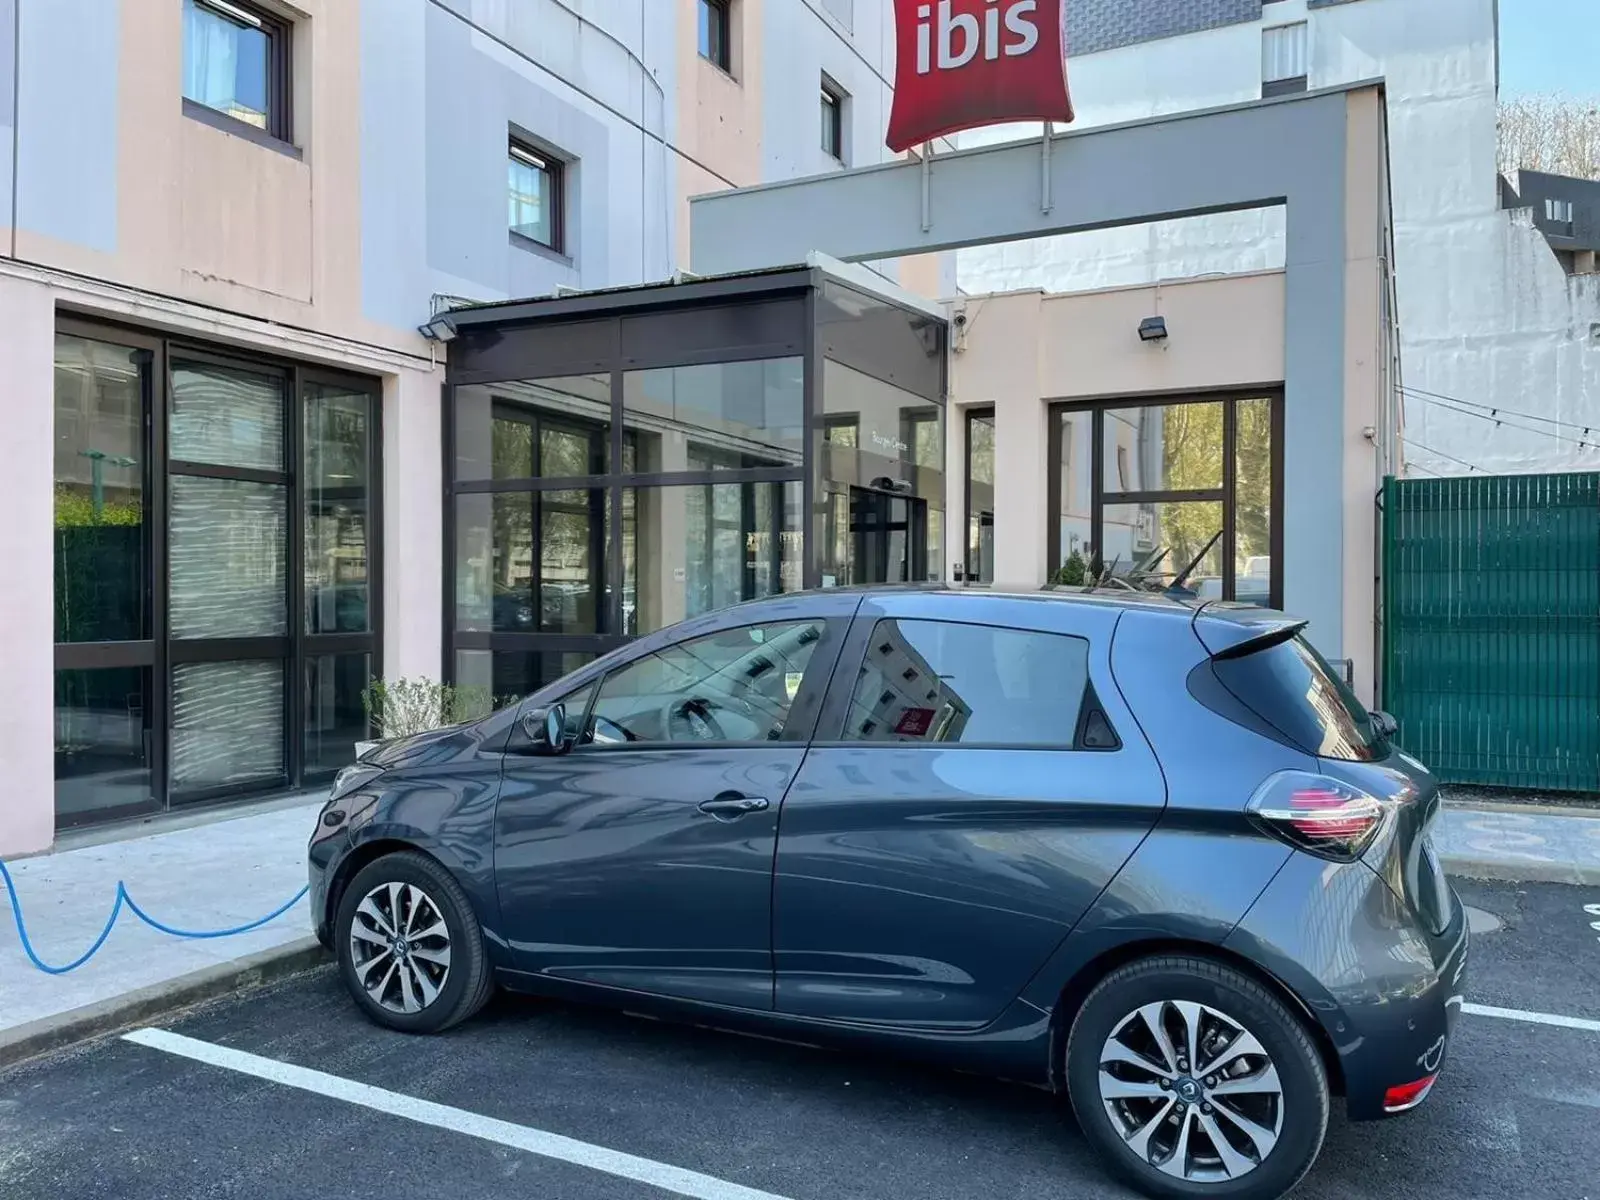 Parking in ibis Bourges Centre